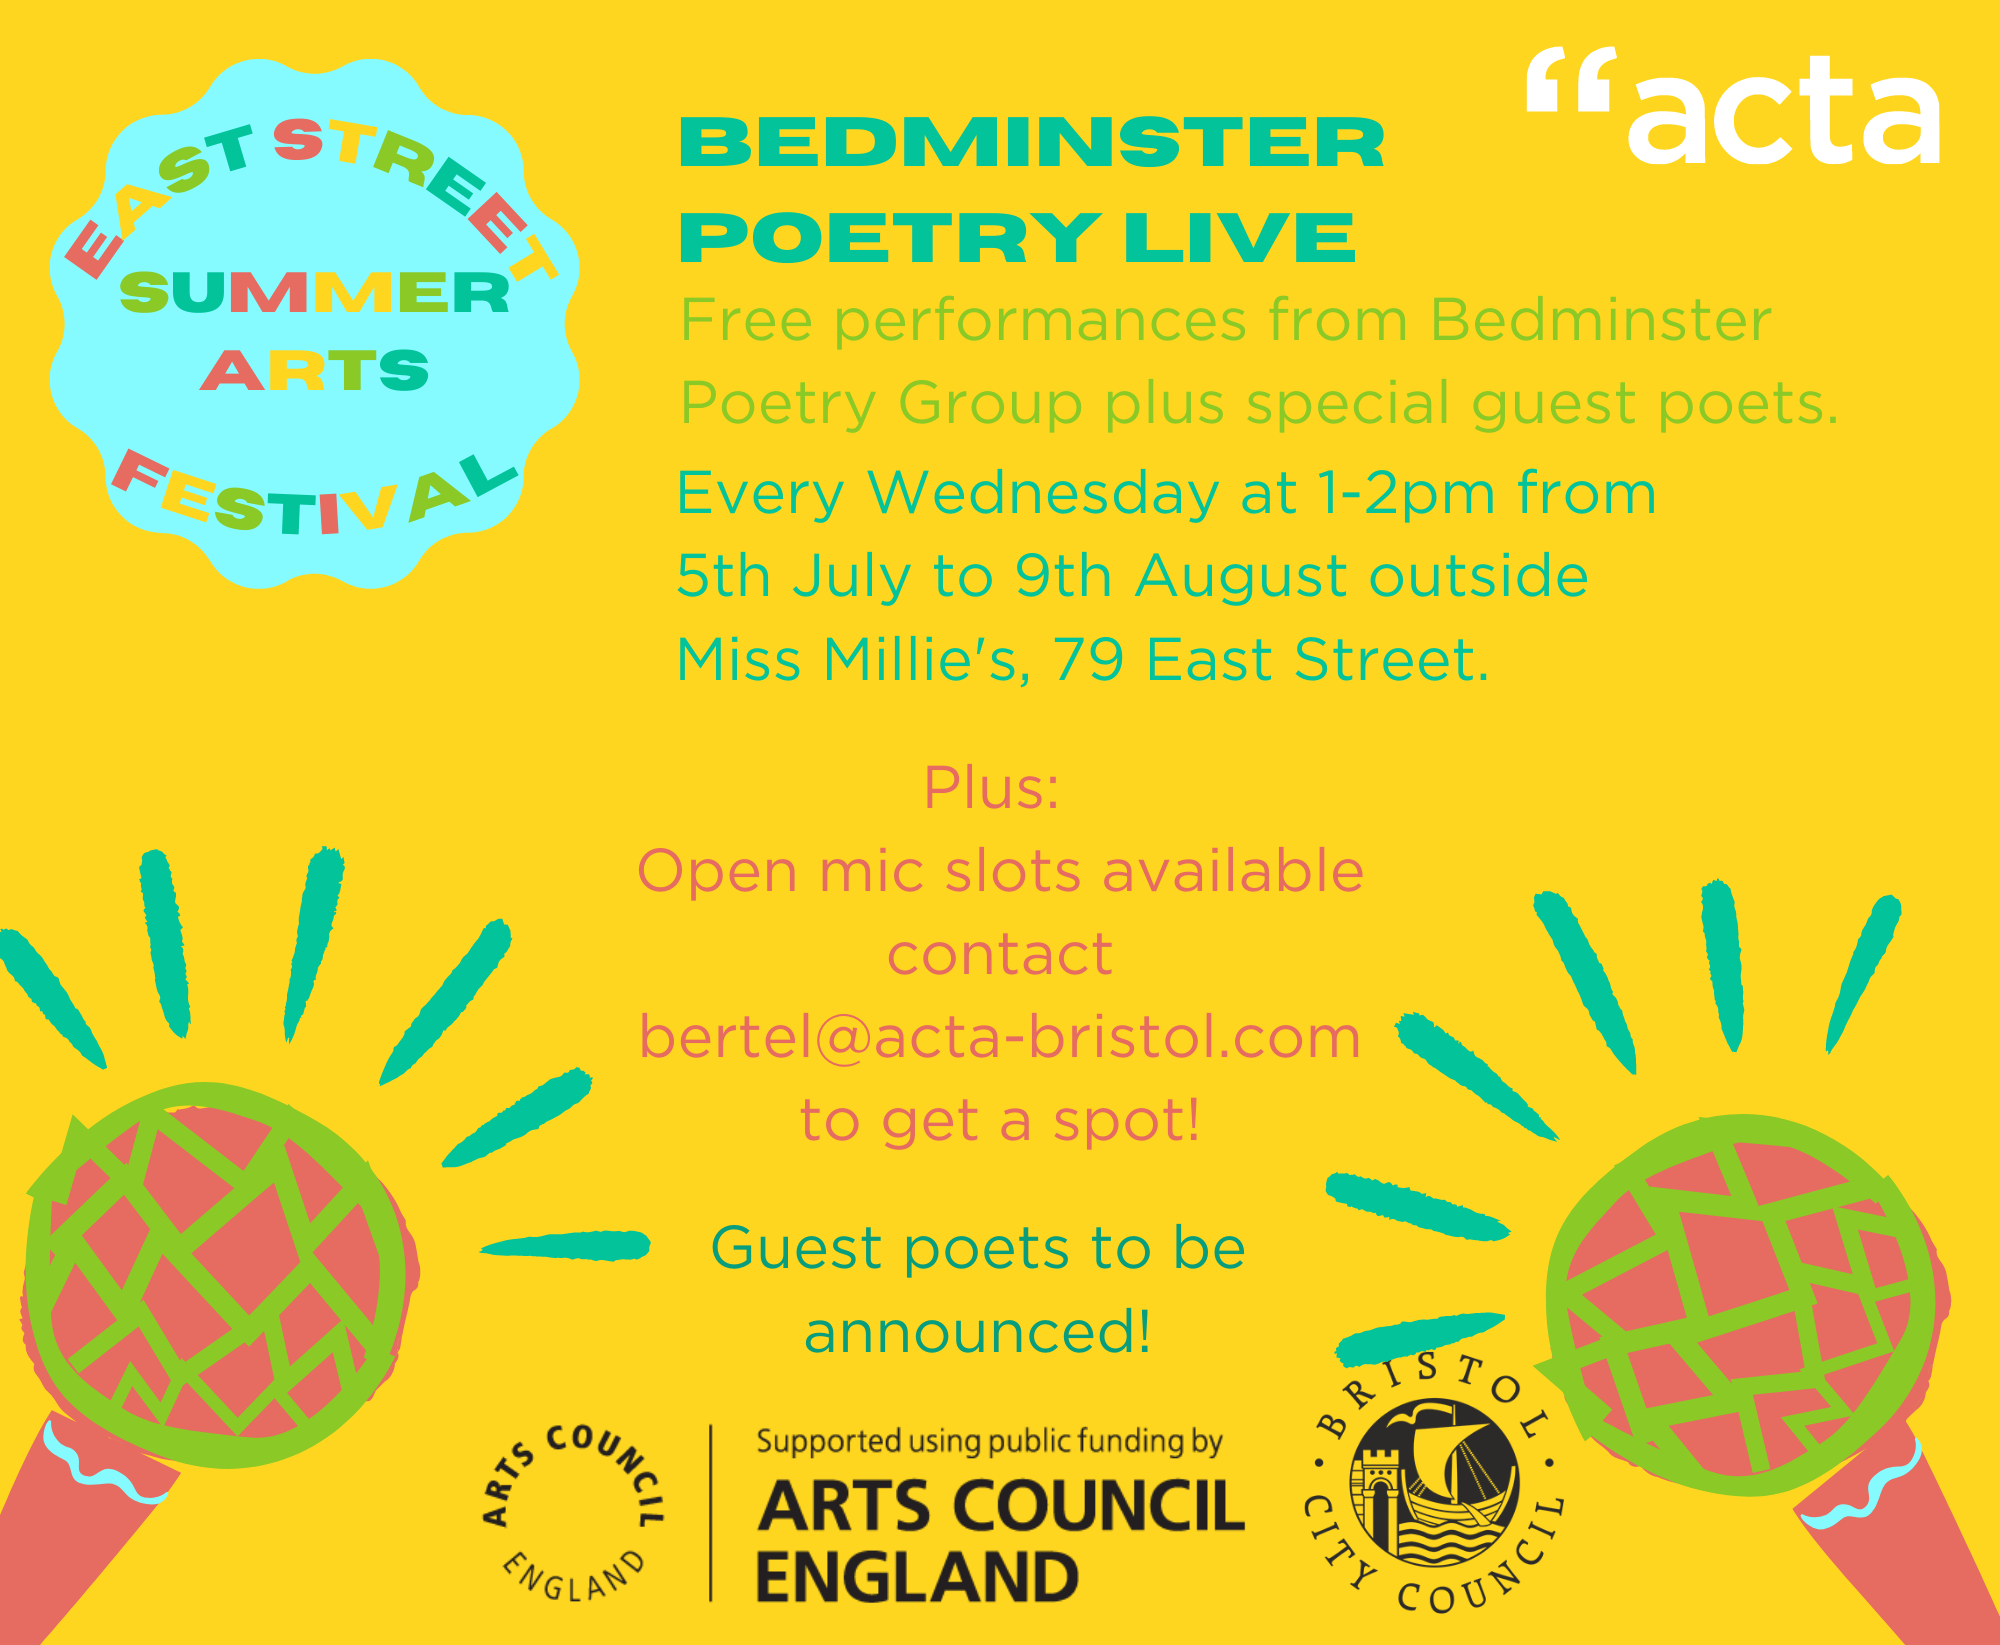 Bedminster Poetry Live